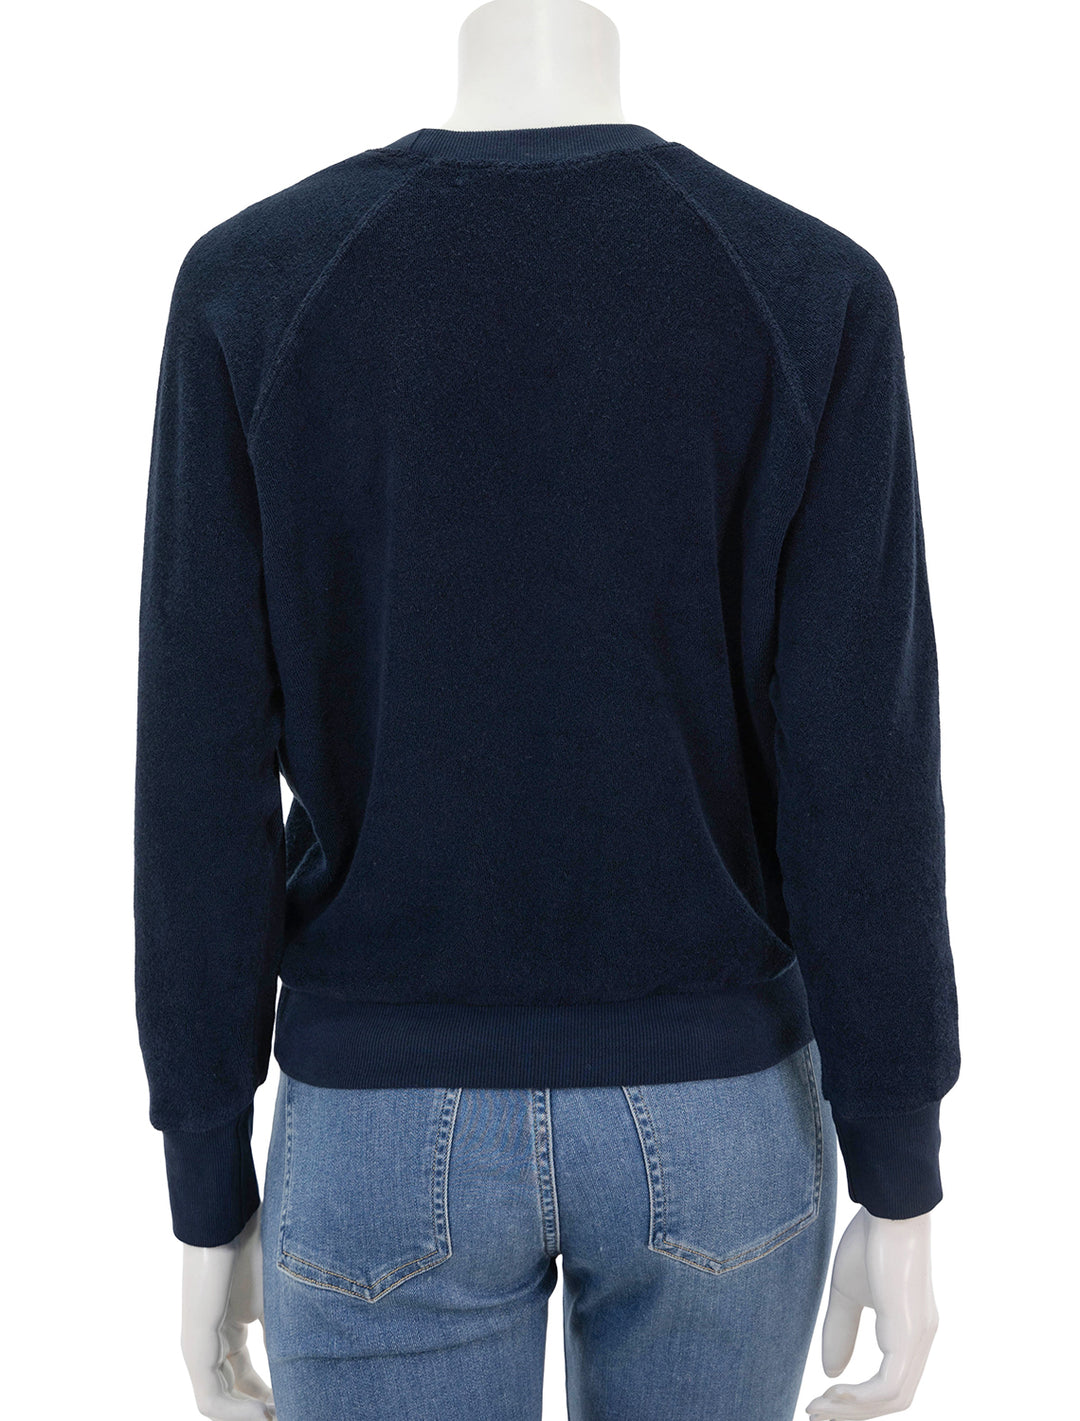 Back view of Perfectwhitetee's saylor terry sweatshirt in navy.